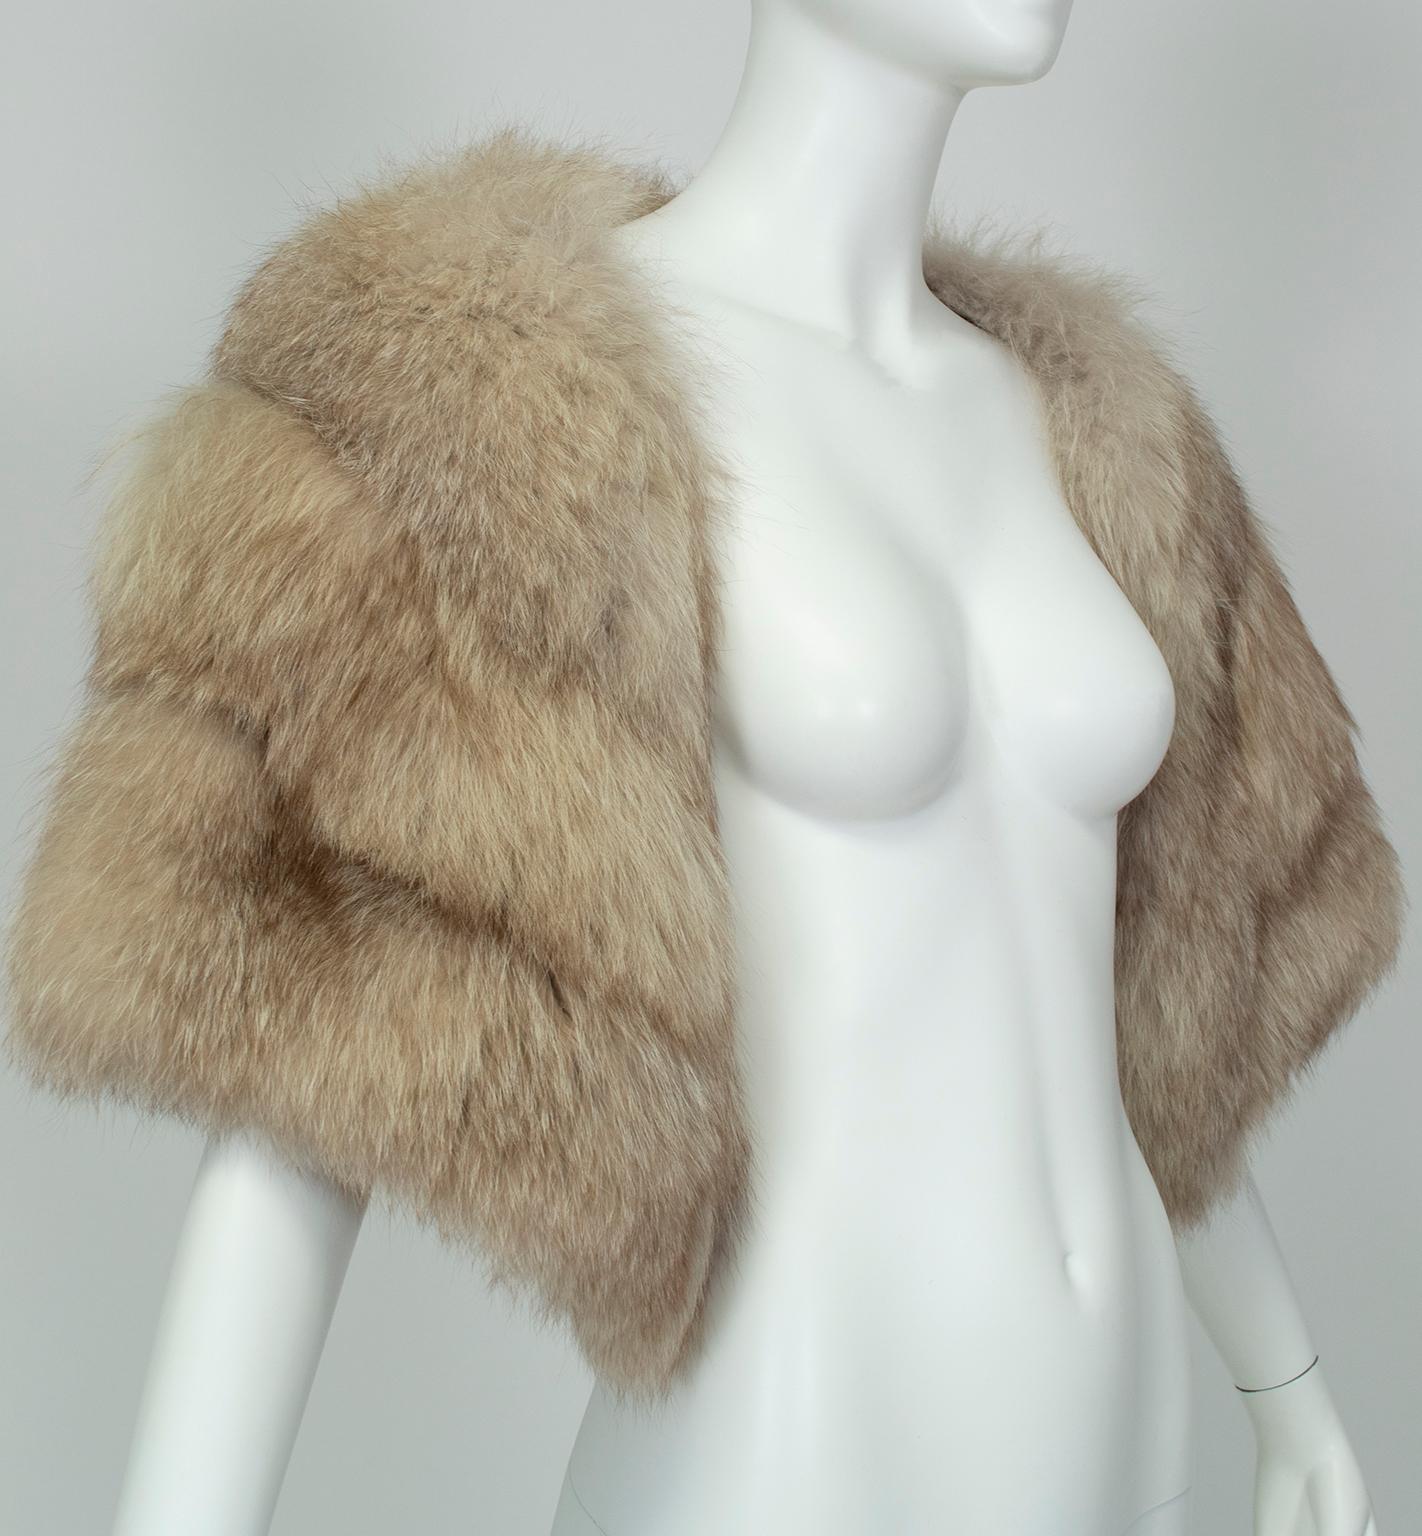 As timeless as a set of pearls, fur stoles convey ladylike elegance and remain essential-wearing with strapless dresses. In addition to its hard-to-find lighter color, this fox version offers absurdly high loft for a luxurious eyelash effect. It